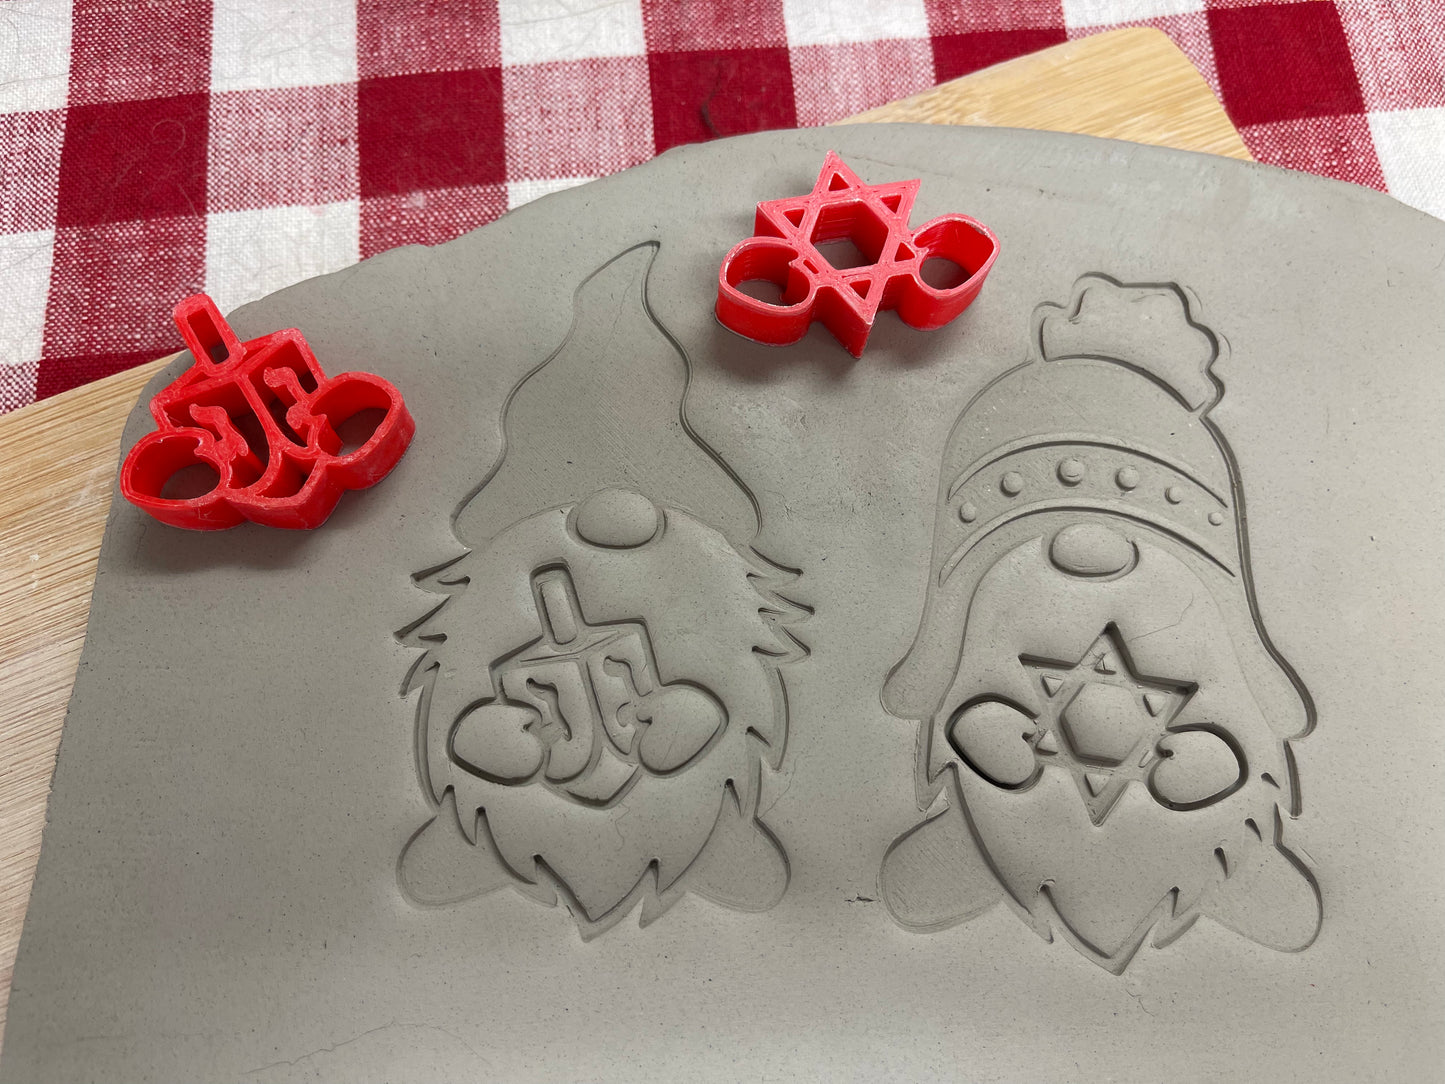 Pottery Stamp, Gnome hands extras, Hanukkah designs - multiple sizes